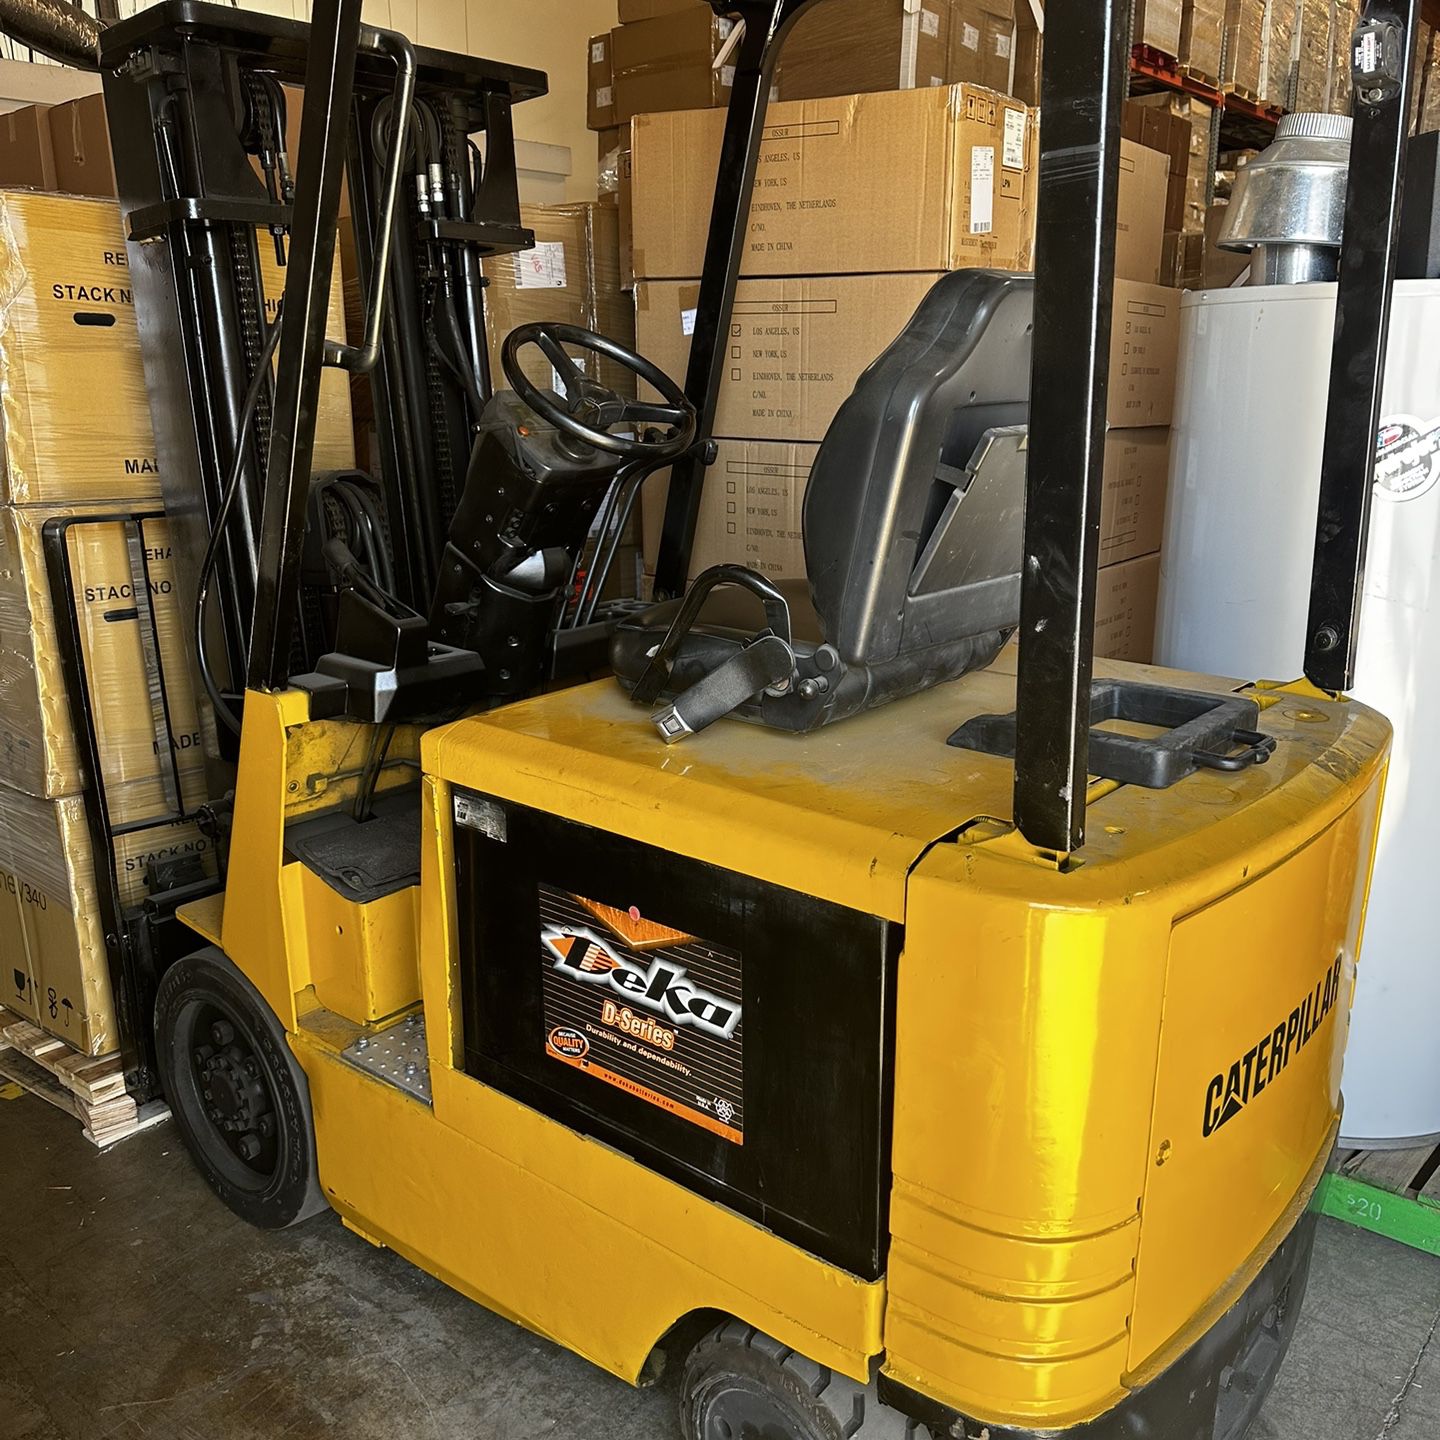 Caterpillar Electric Forklift- Brand New Refurbished Battery- 3 Stage Includes Charger Included